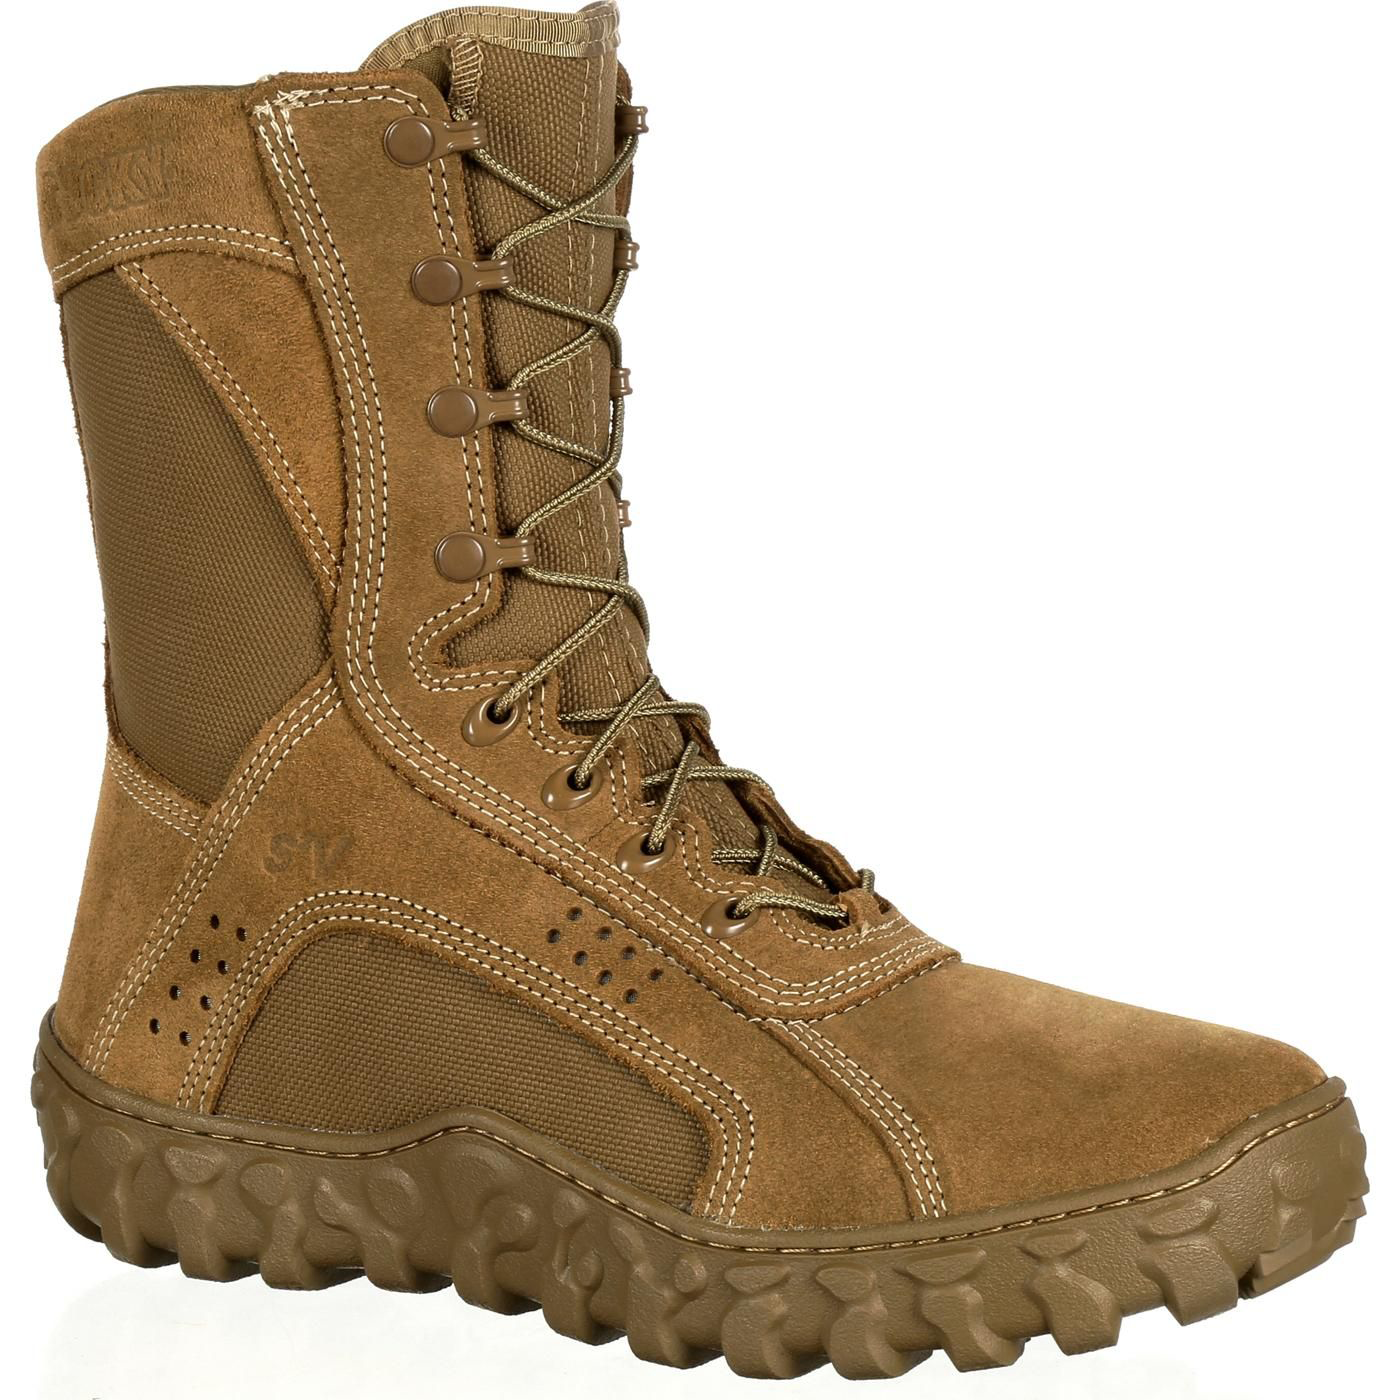 Rocky S2V Tactical Military Boots for Men - Coyote Brown - 13.5M